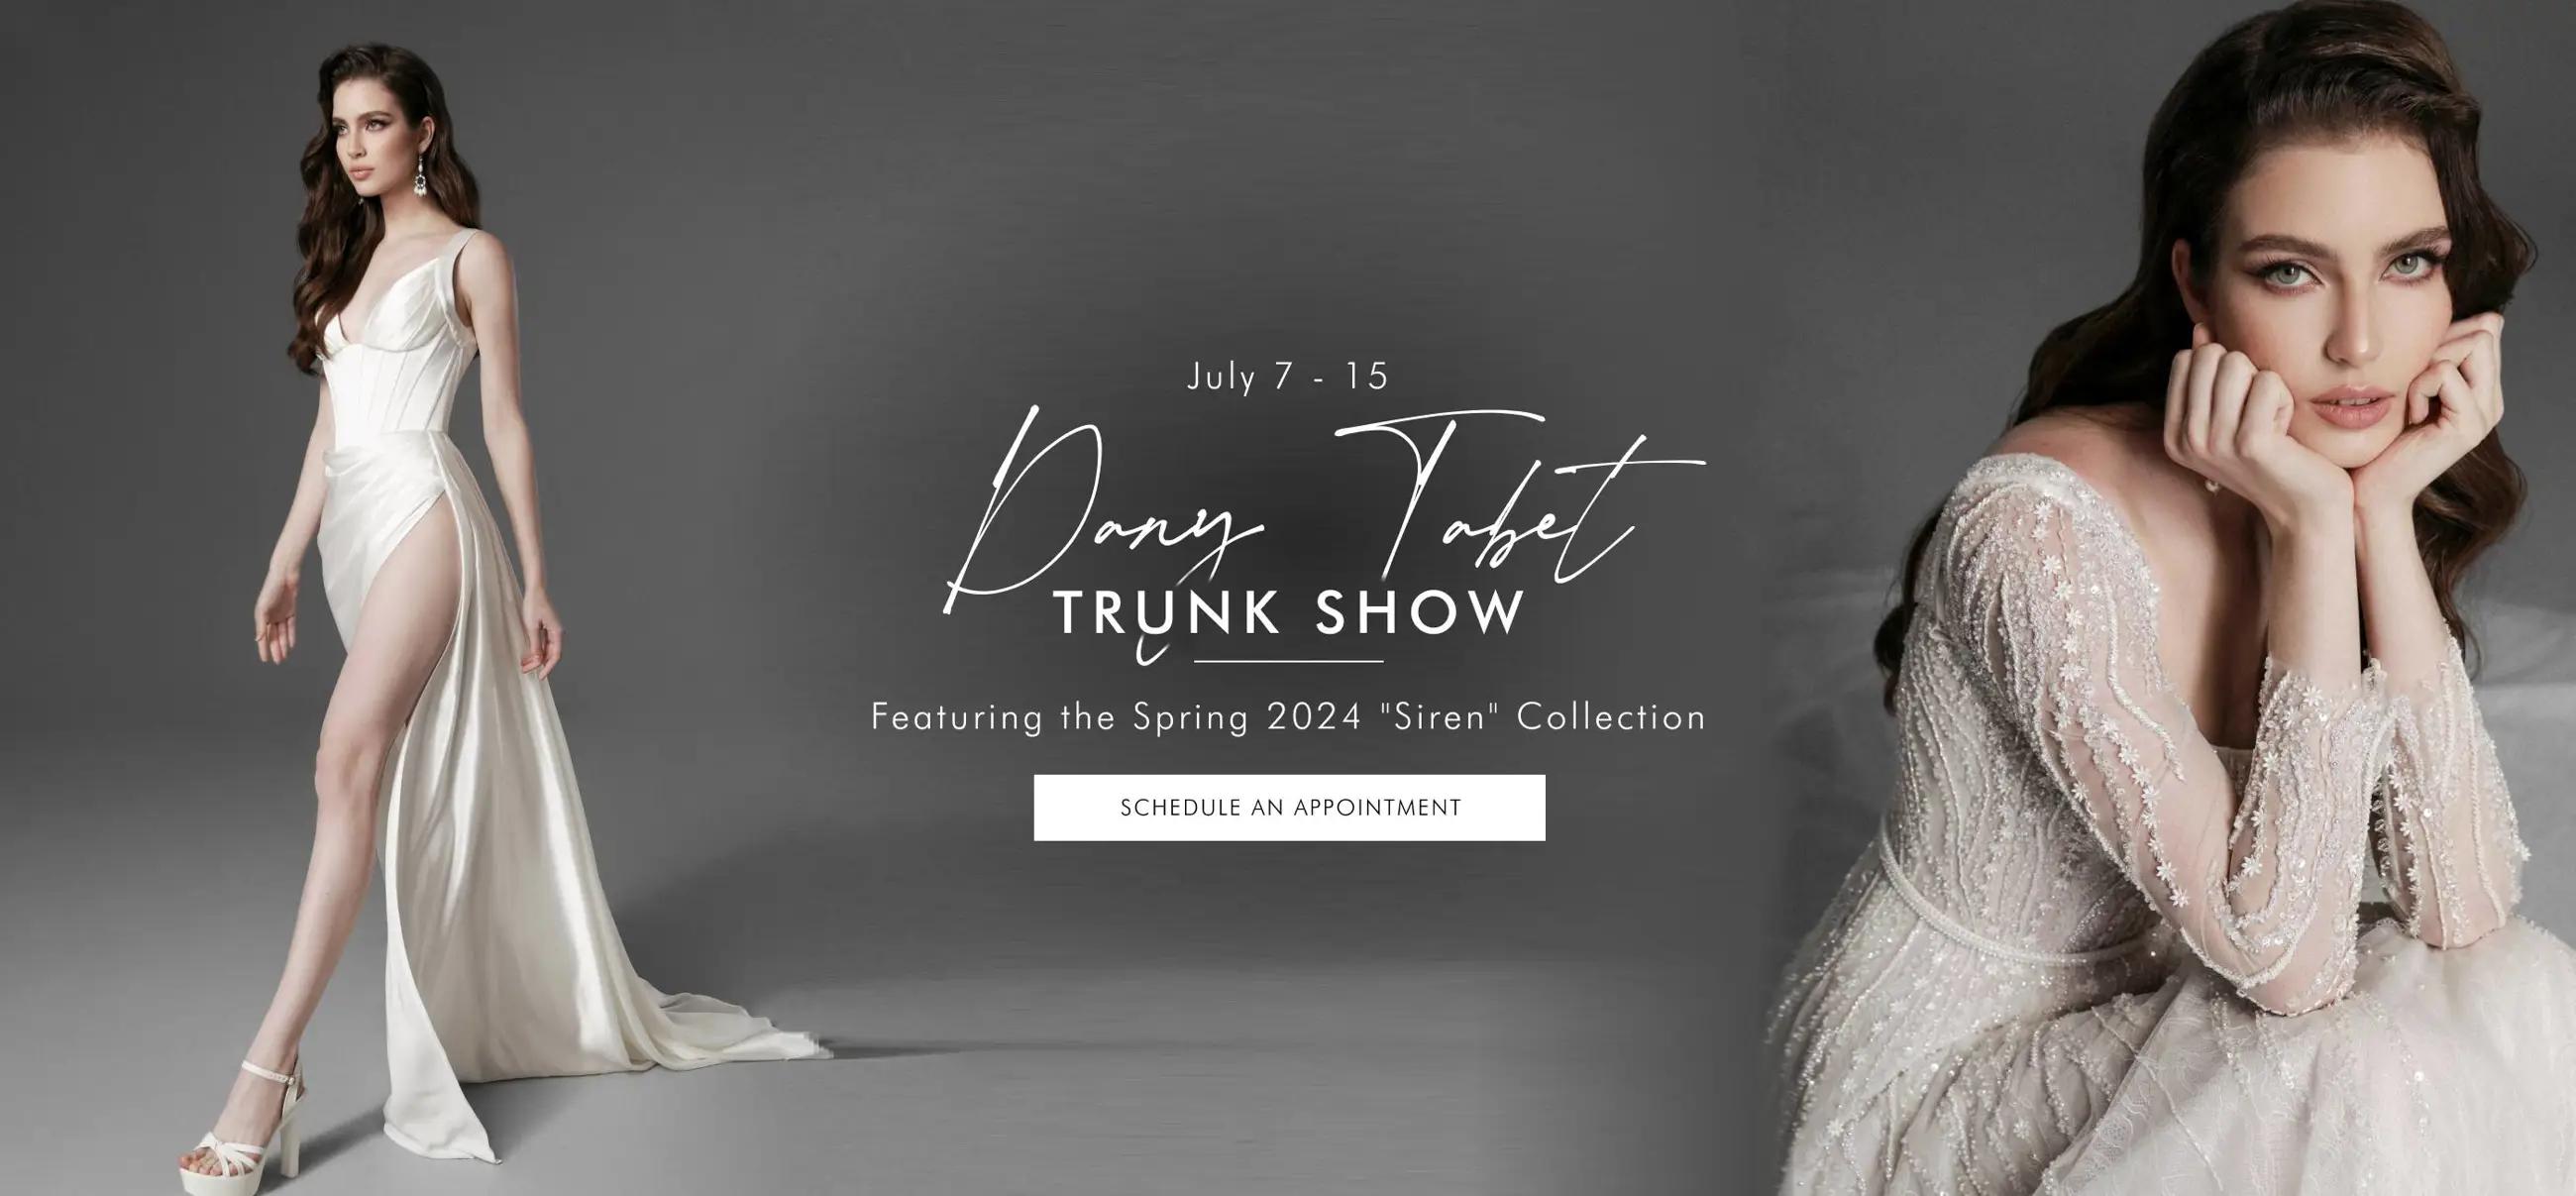 Dany Tabet Trunk Show at Madeleine's Daughter